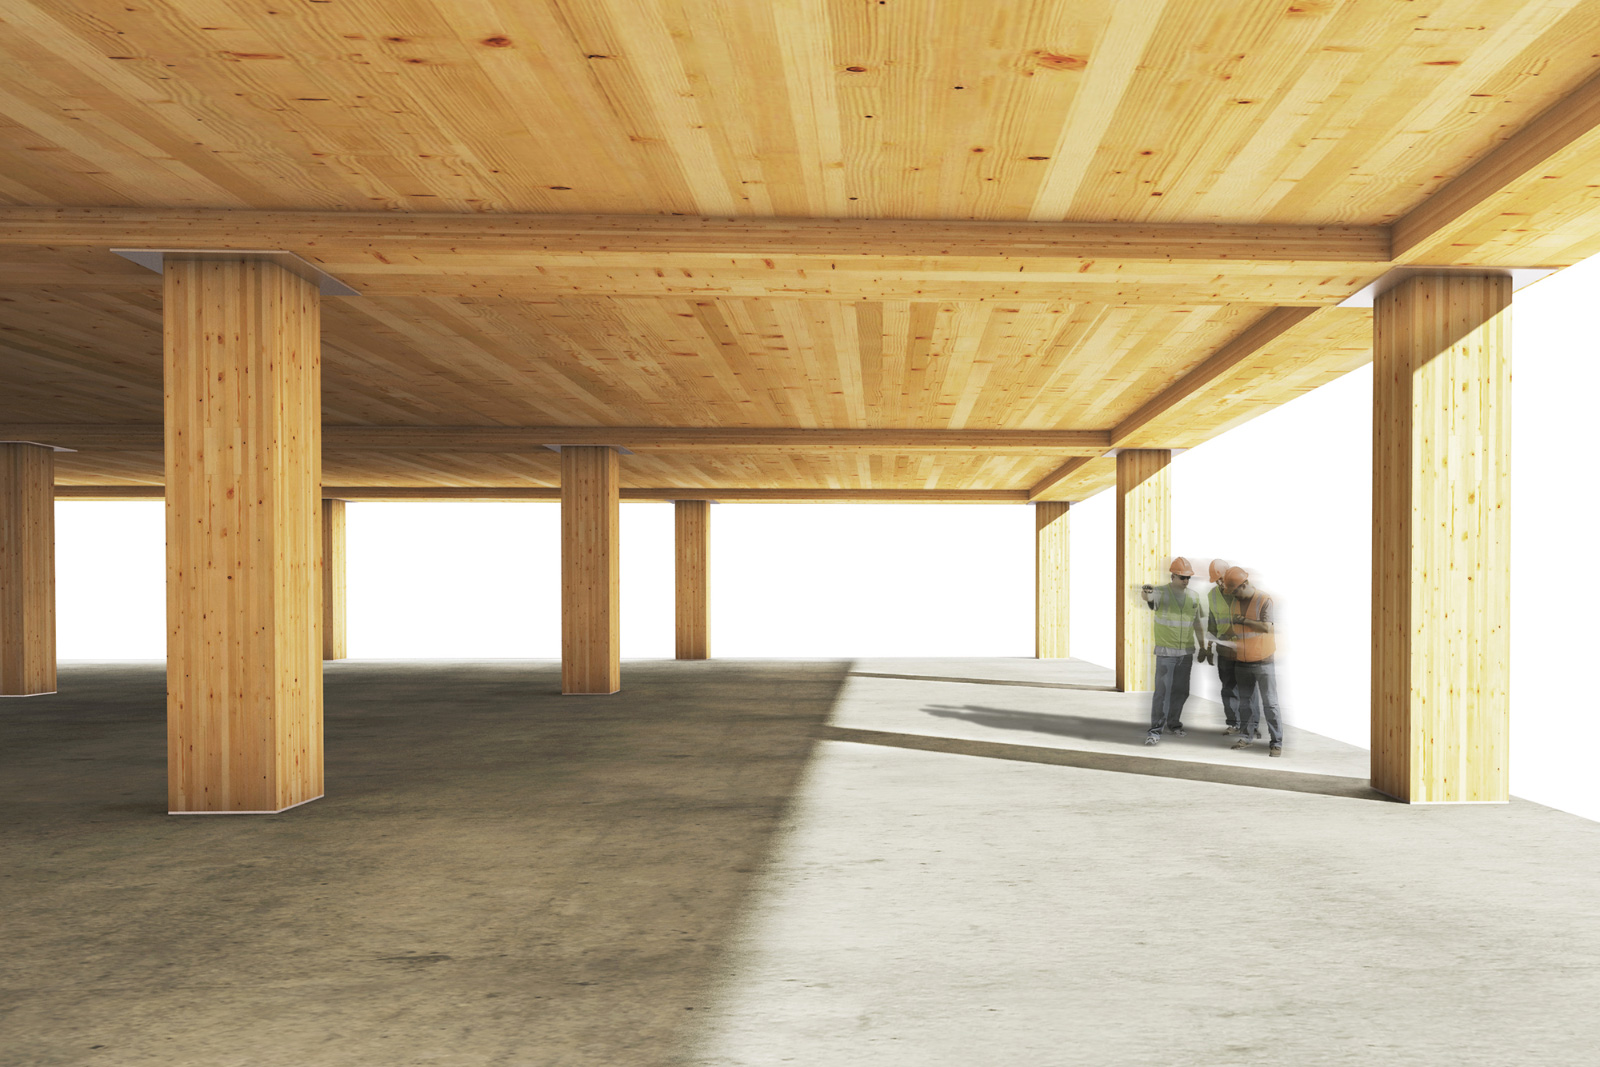 Rendering of a timber construction site